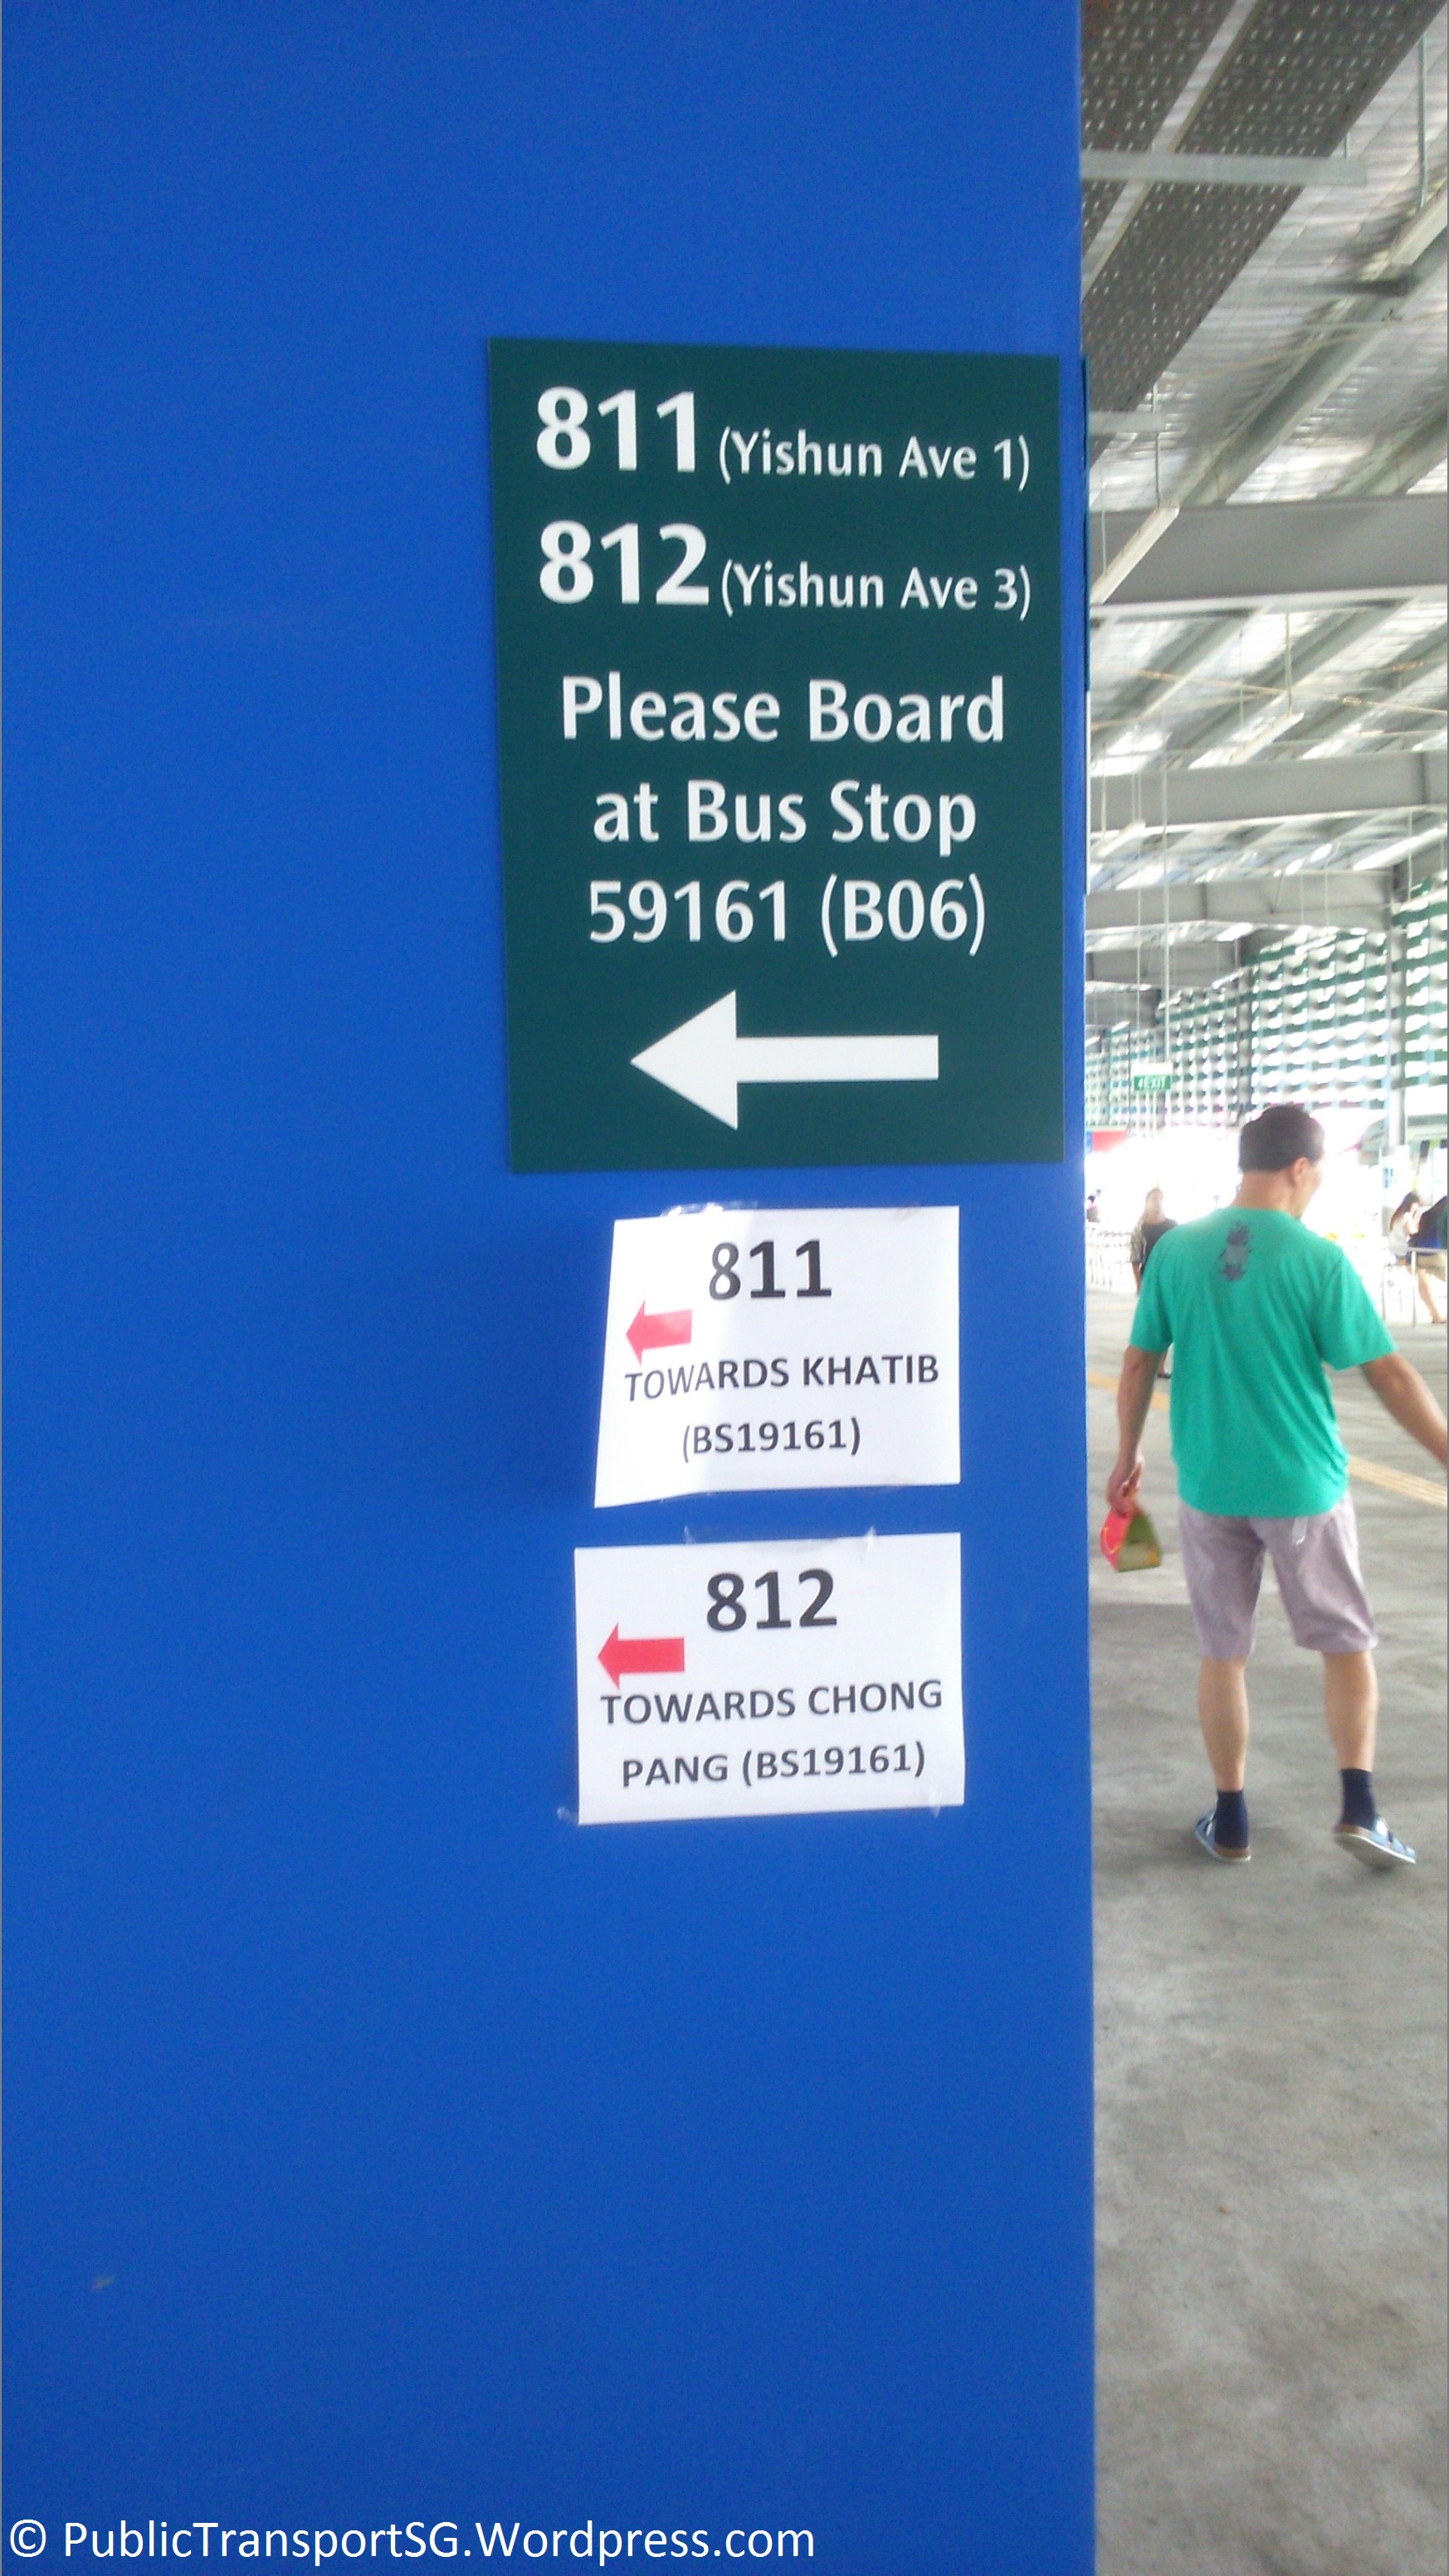 Follow the signs for to bus stop 59161.